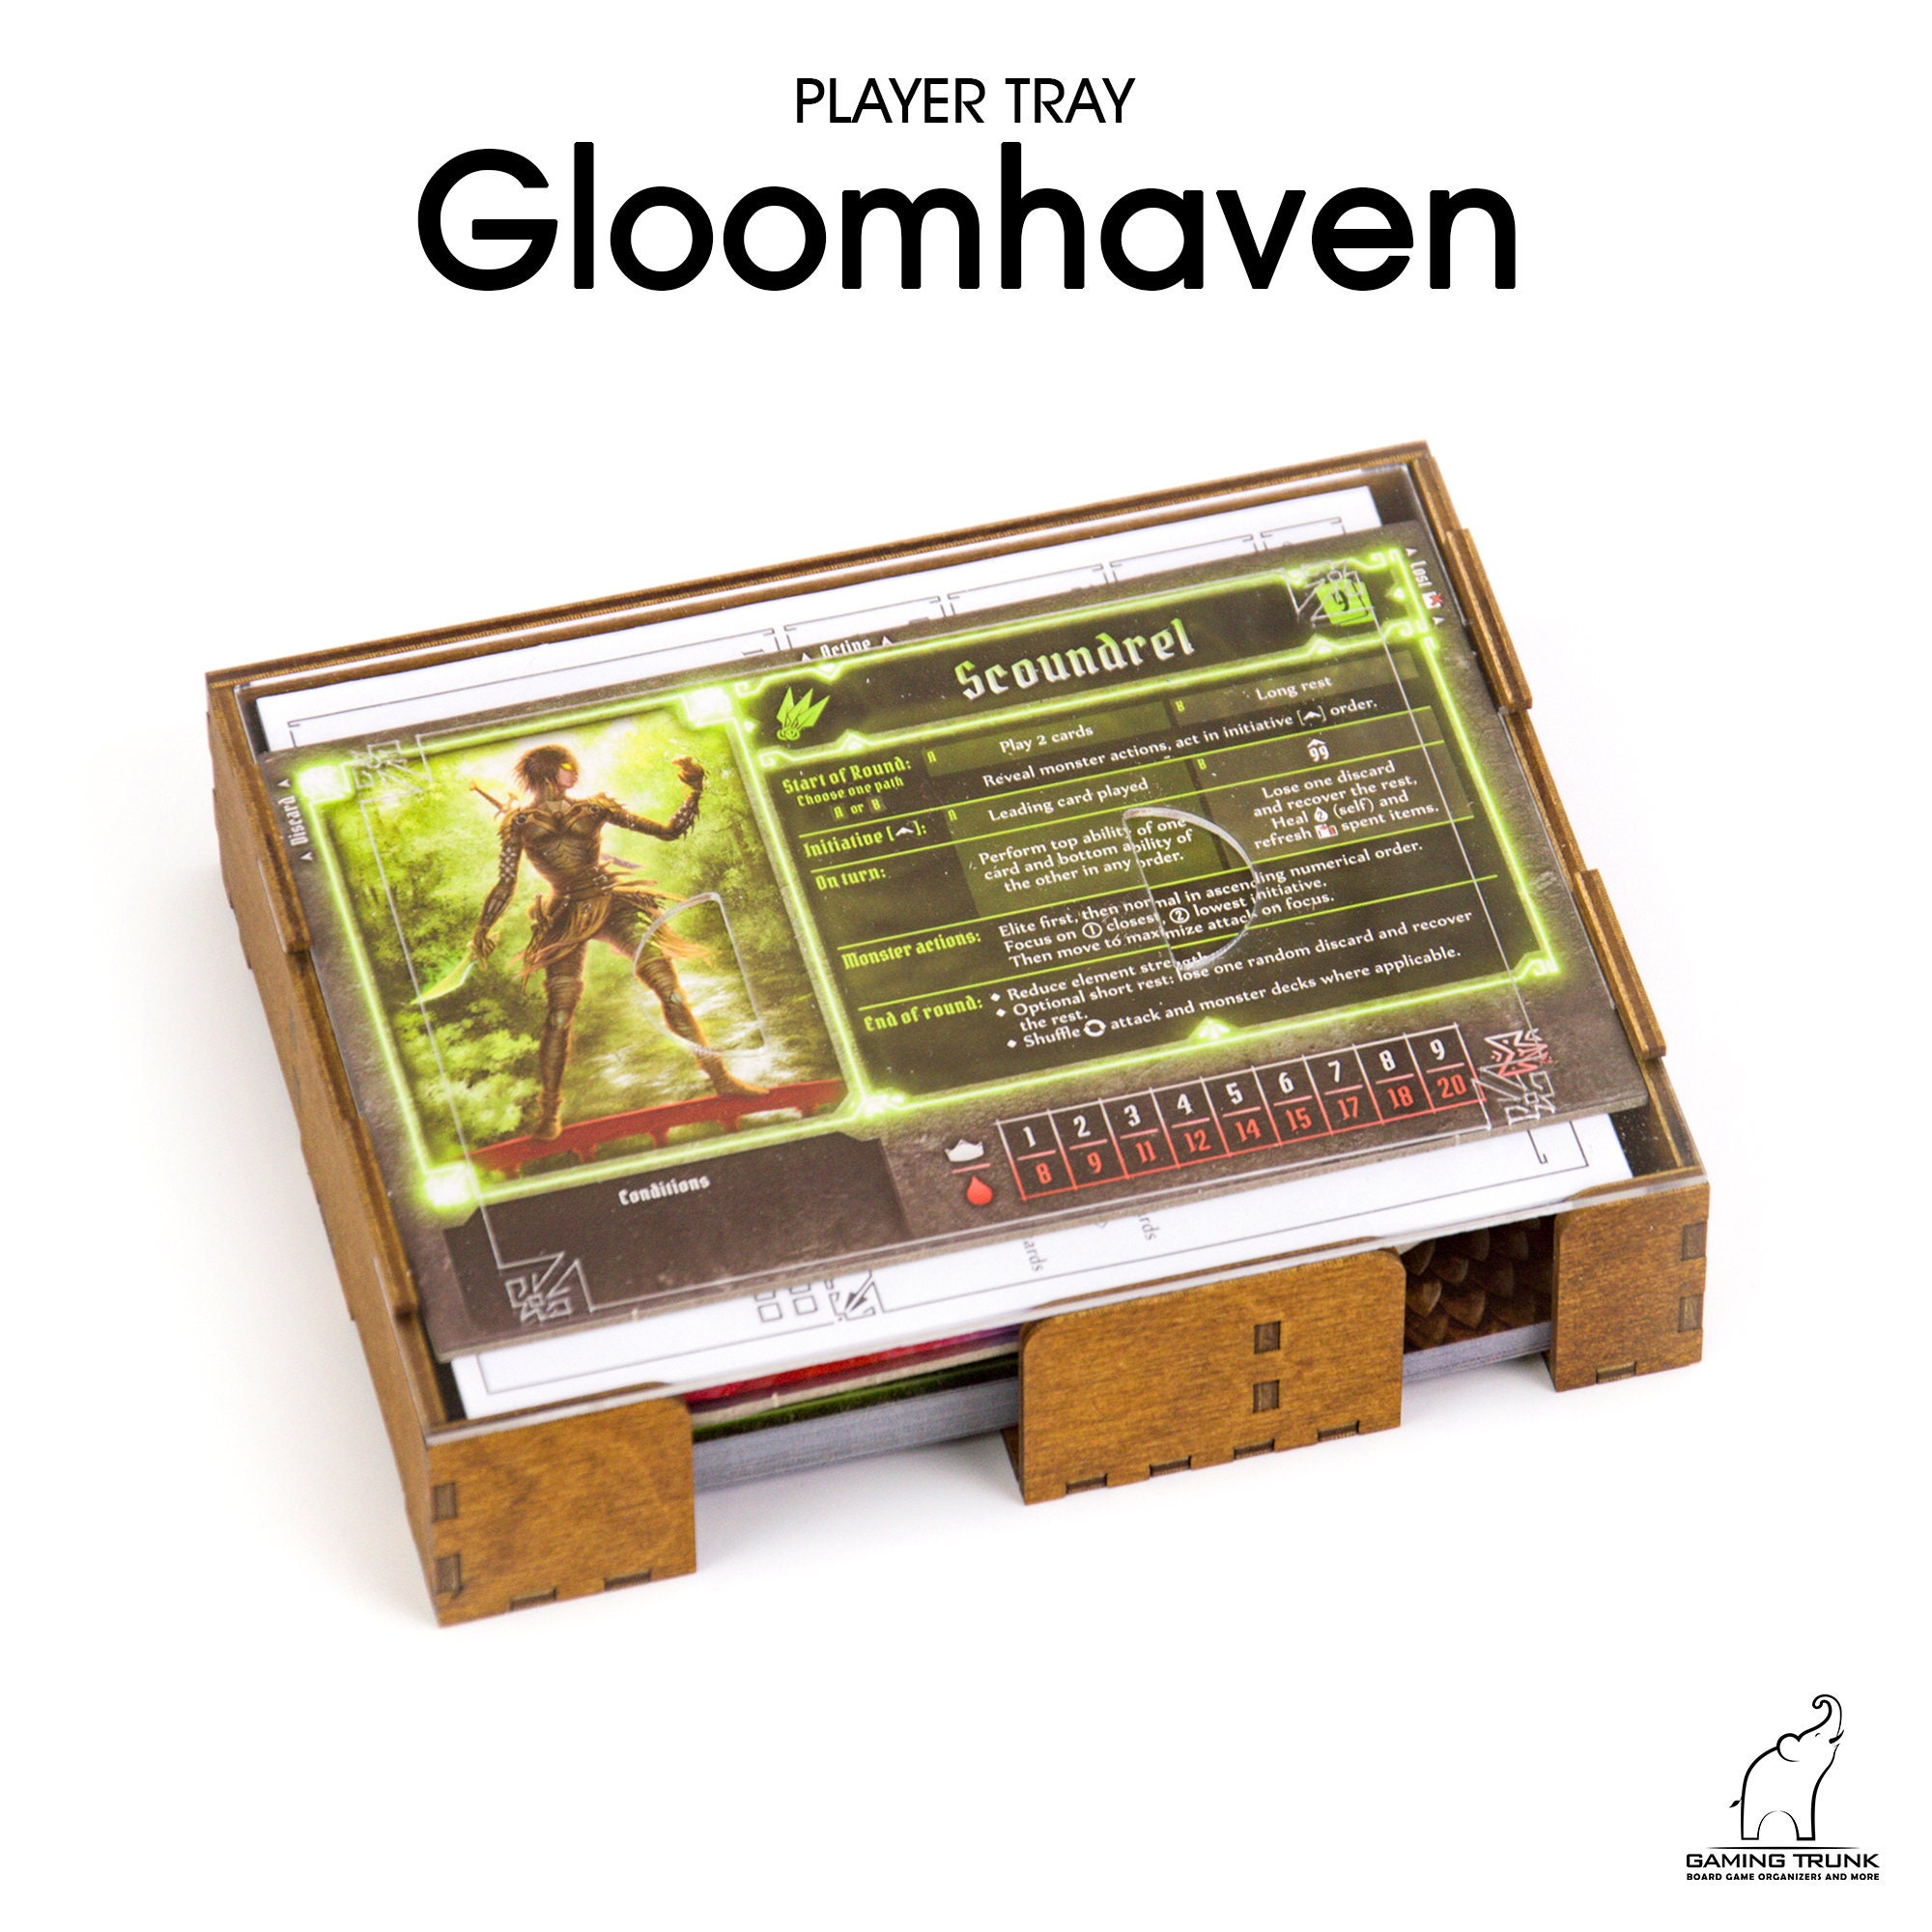 Gloomhaven tray system - First Project - Made on a Glowforge